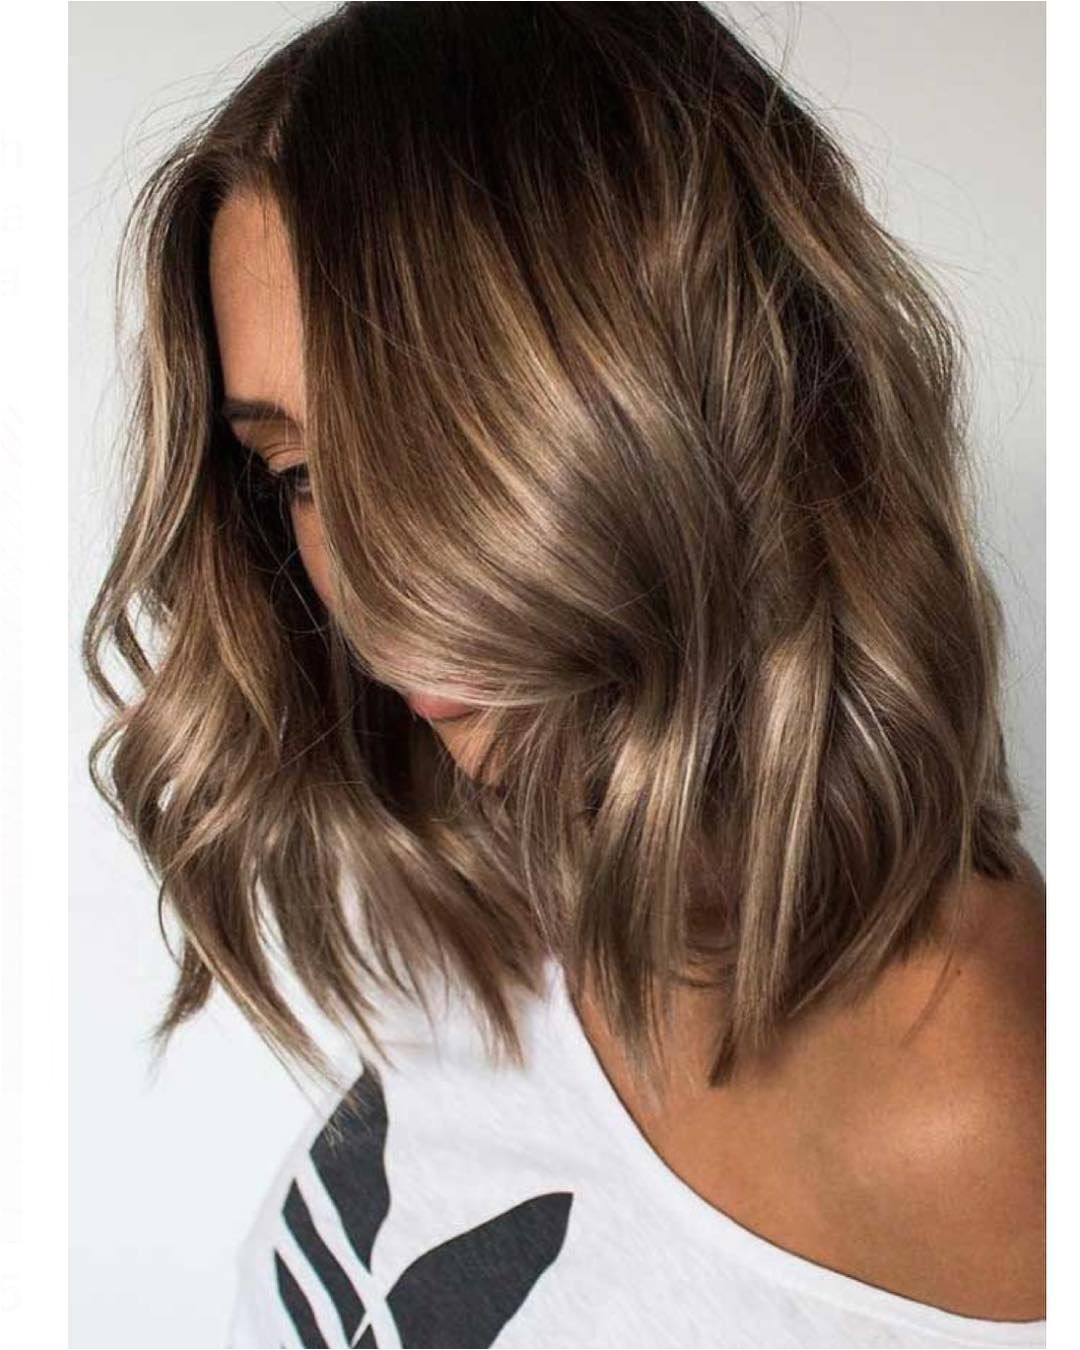 Hairstyles and Color for Medium Hair 2019 7 Hottest Hair Color Trends for 2019 Hair Color Ideas